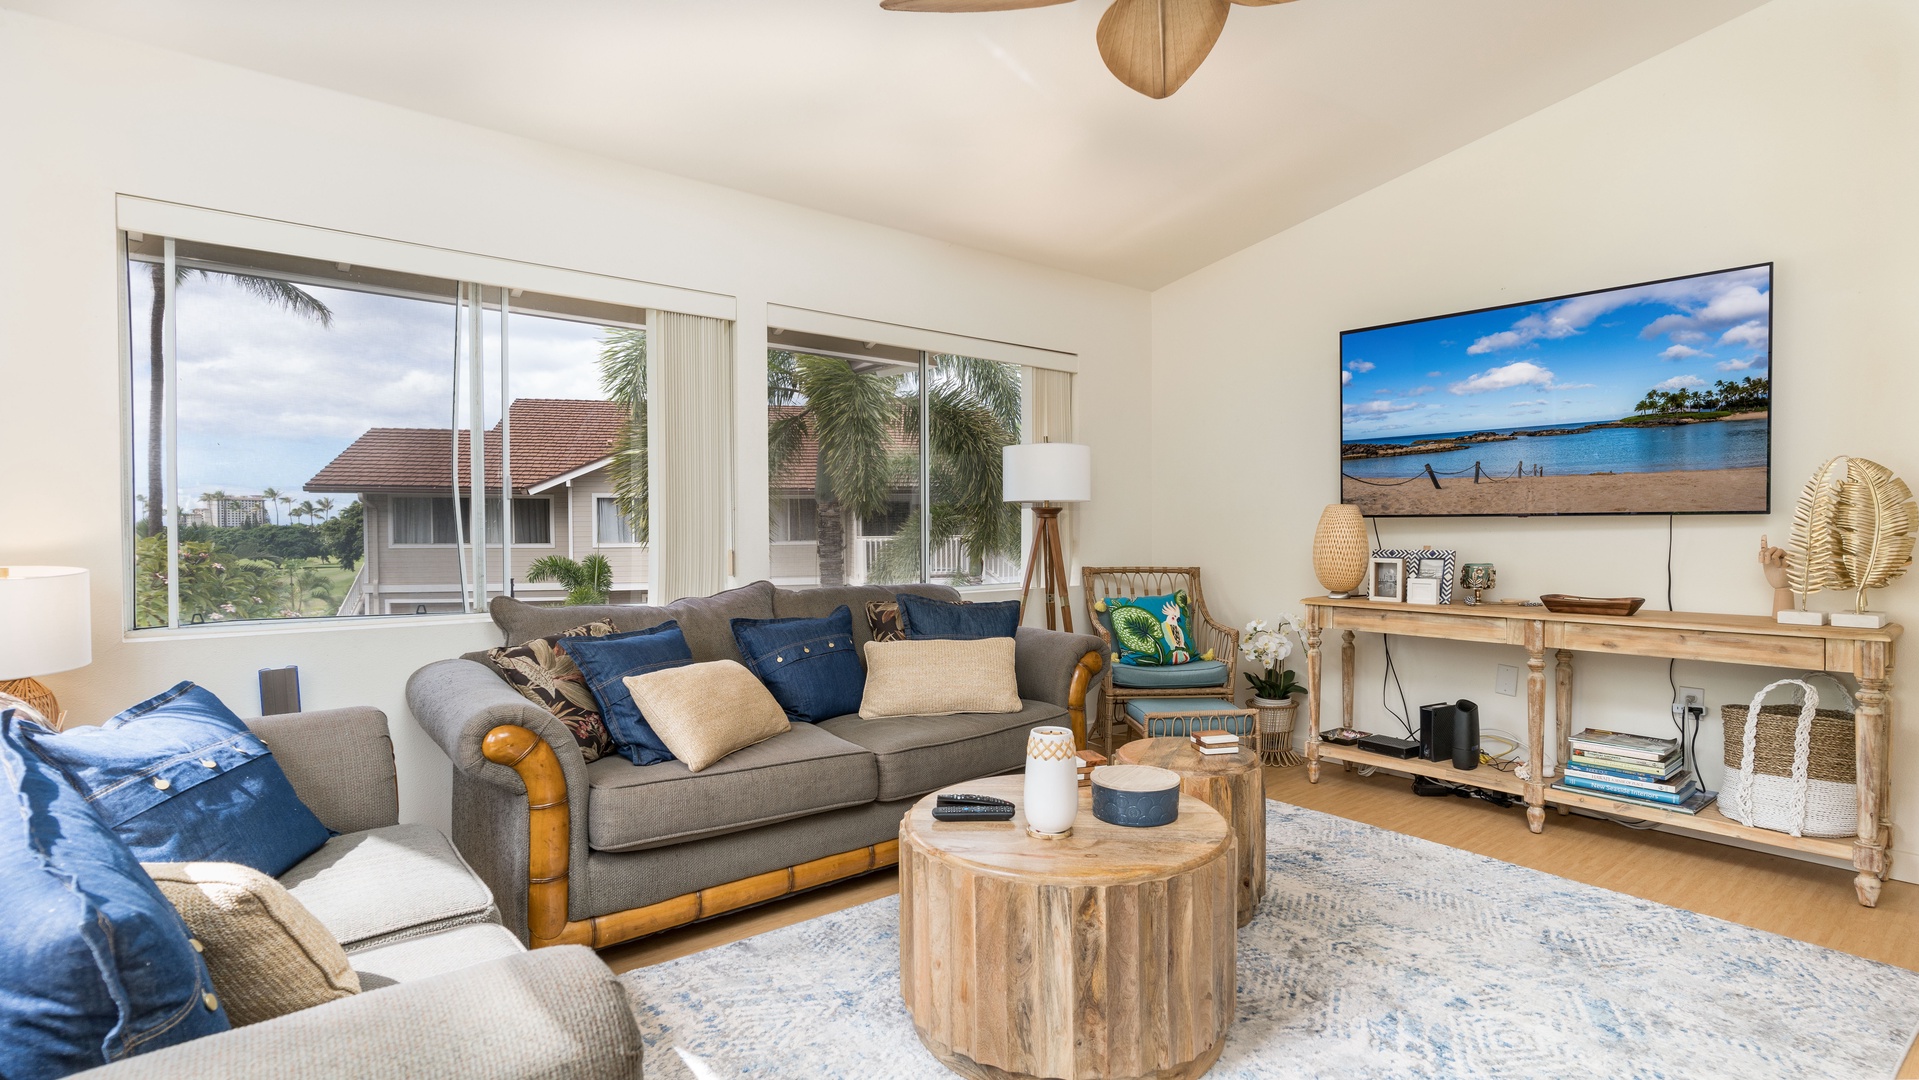 Kapolei Vacation Rentals, Fairways at Ko Olina 4A - Relax with a book or movie night on the television.